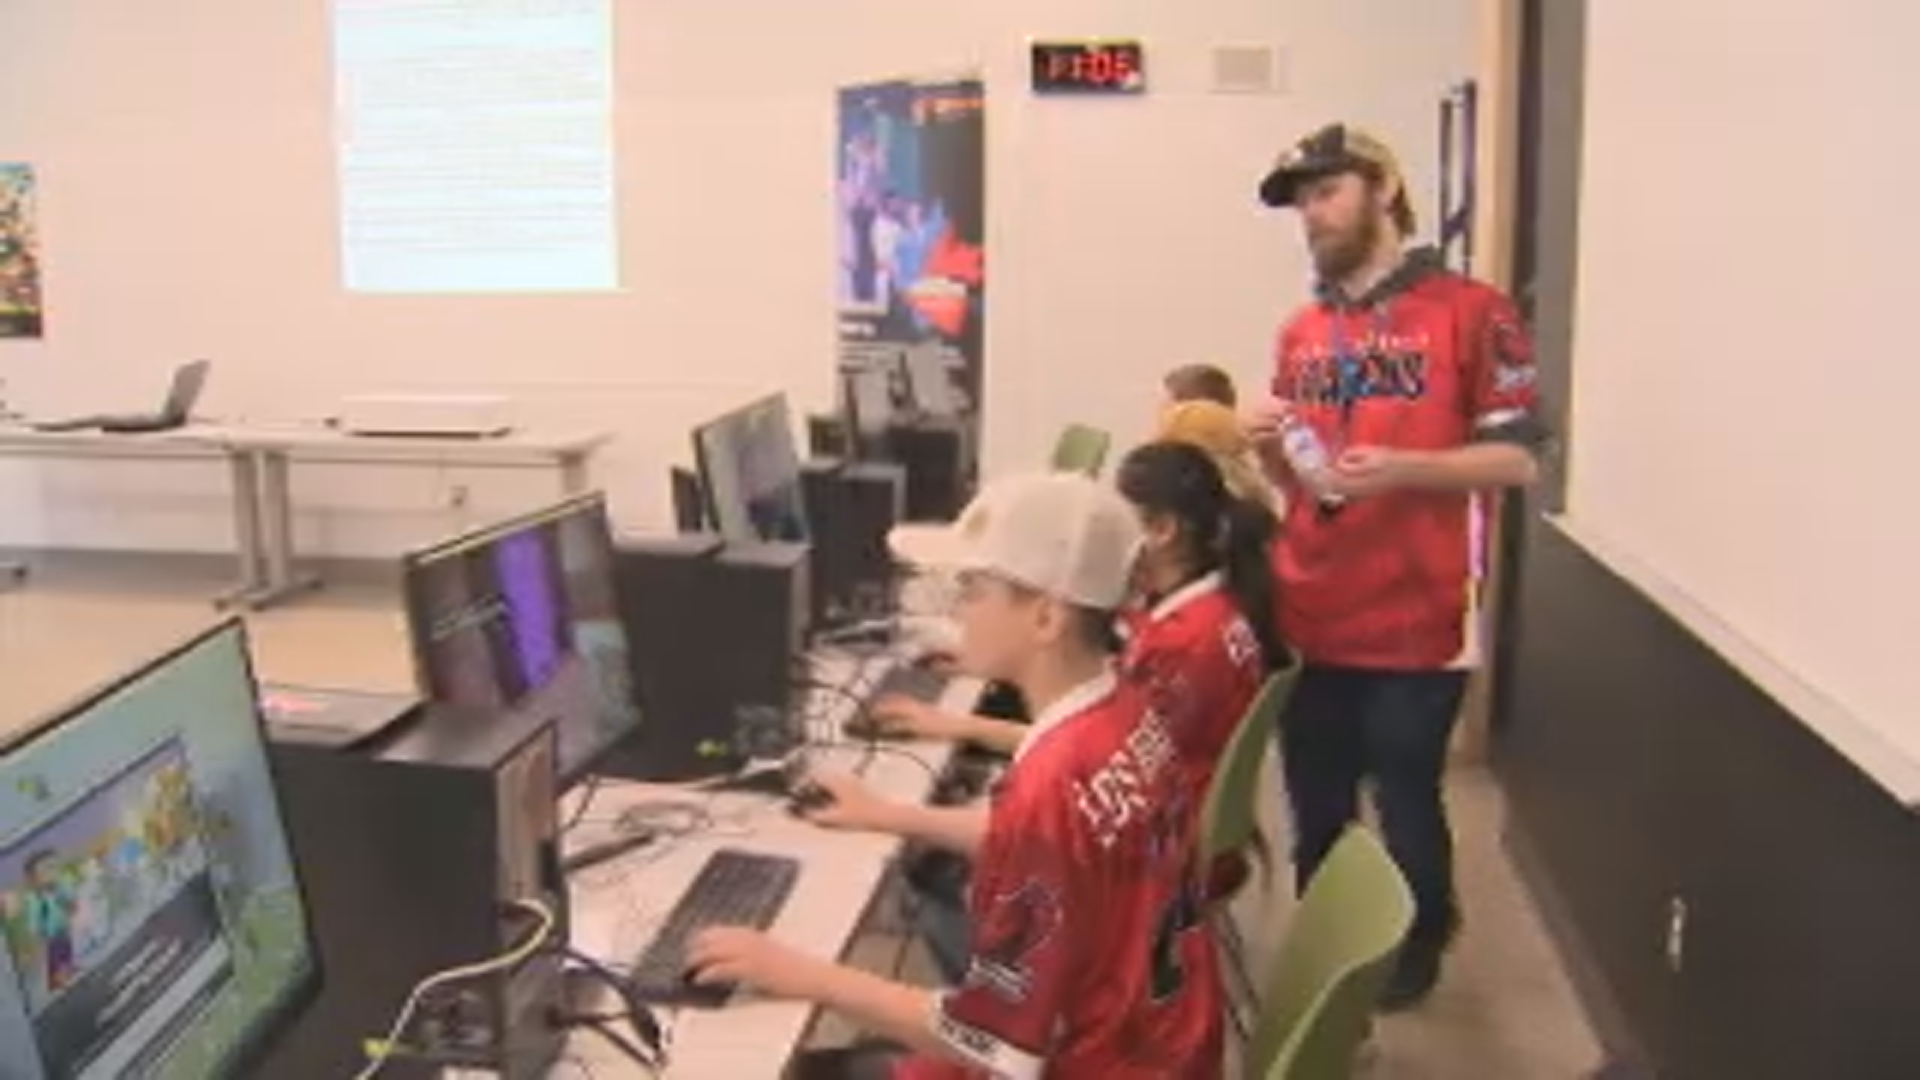 Manitoba students find new ways to learn new skills, develop passions with eSports